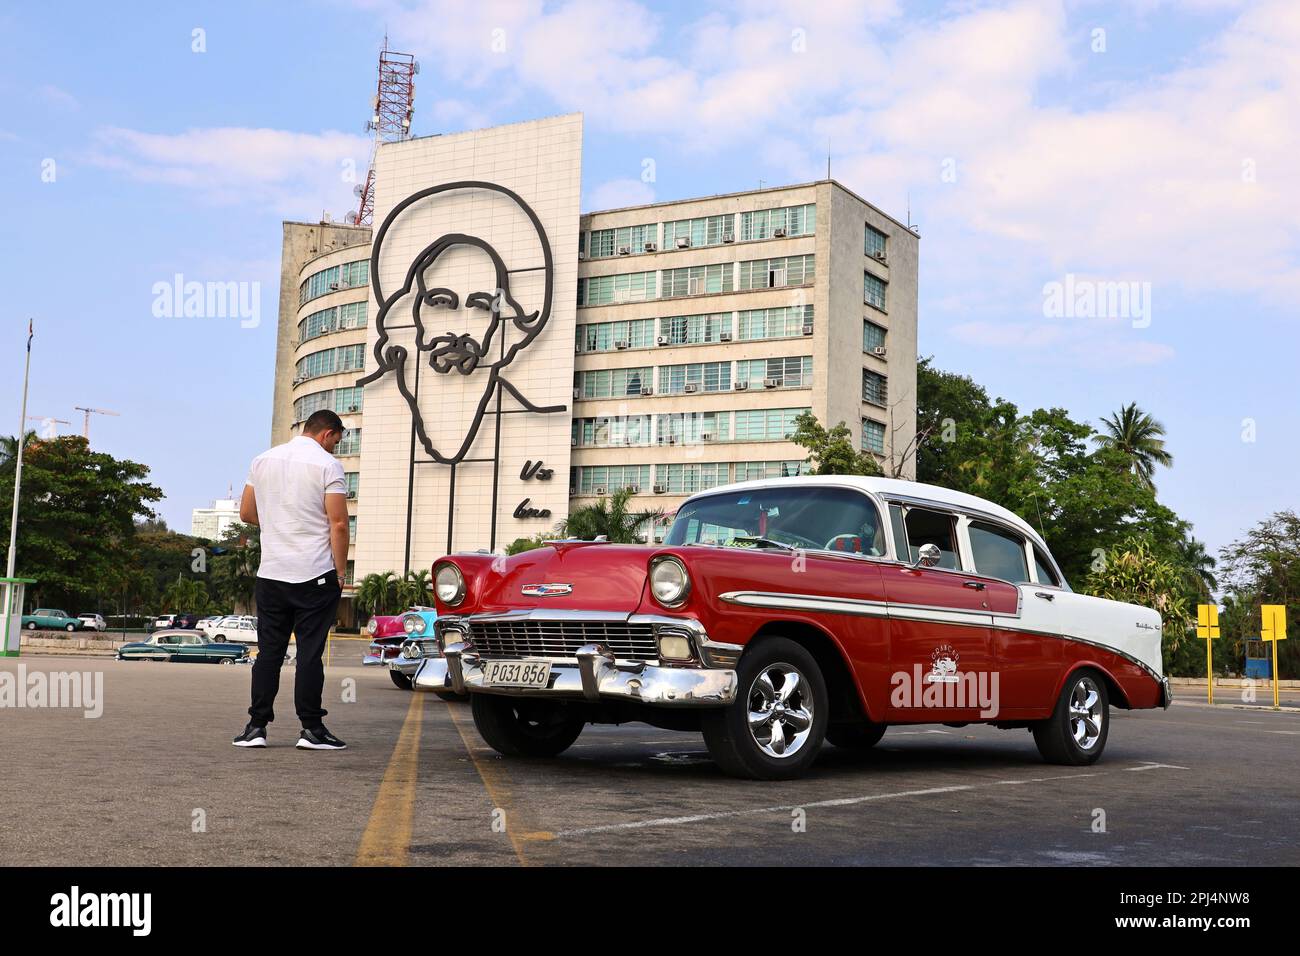 Vintage classic car Chevrolet on Revolution Square against building of Ministry of Information and Communications with Camilo Cienfuegos portrait Stock Photo